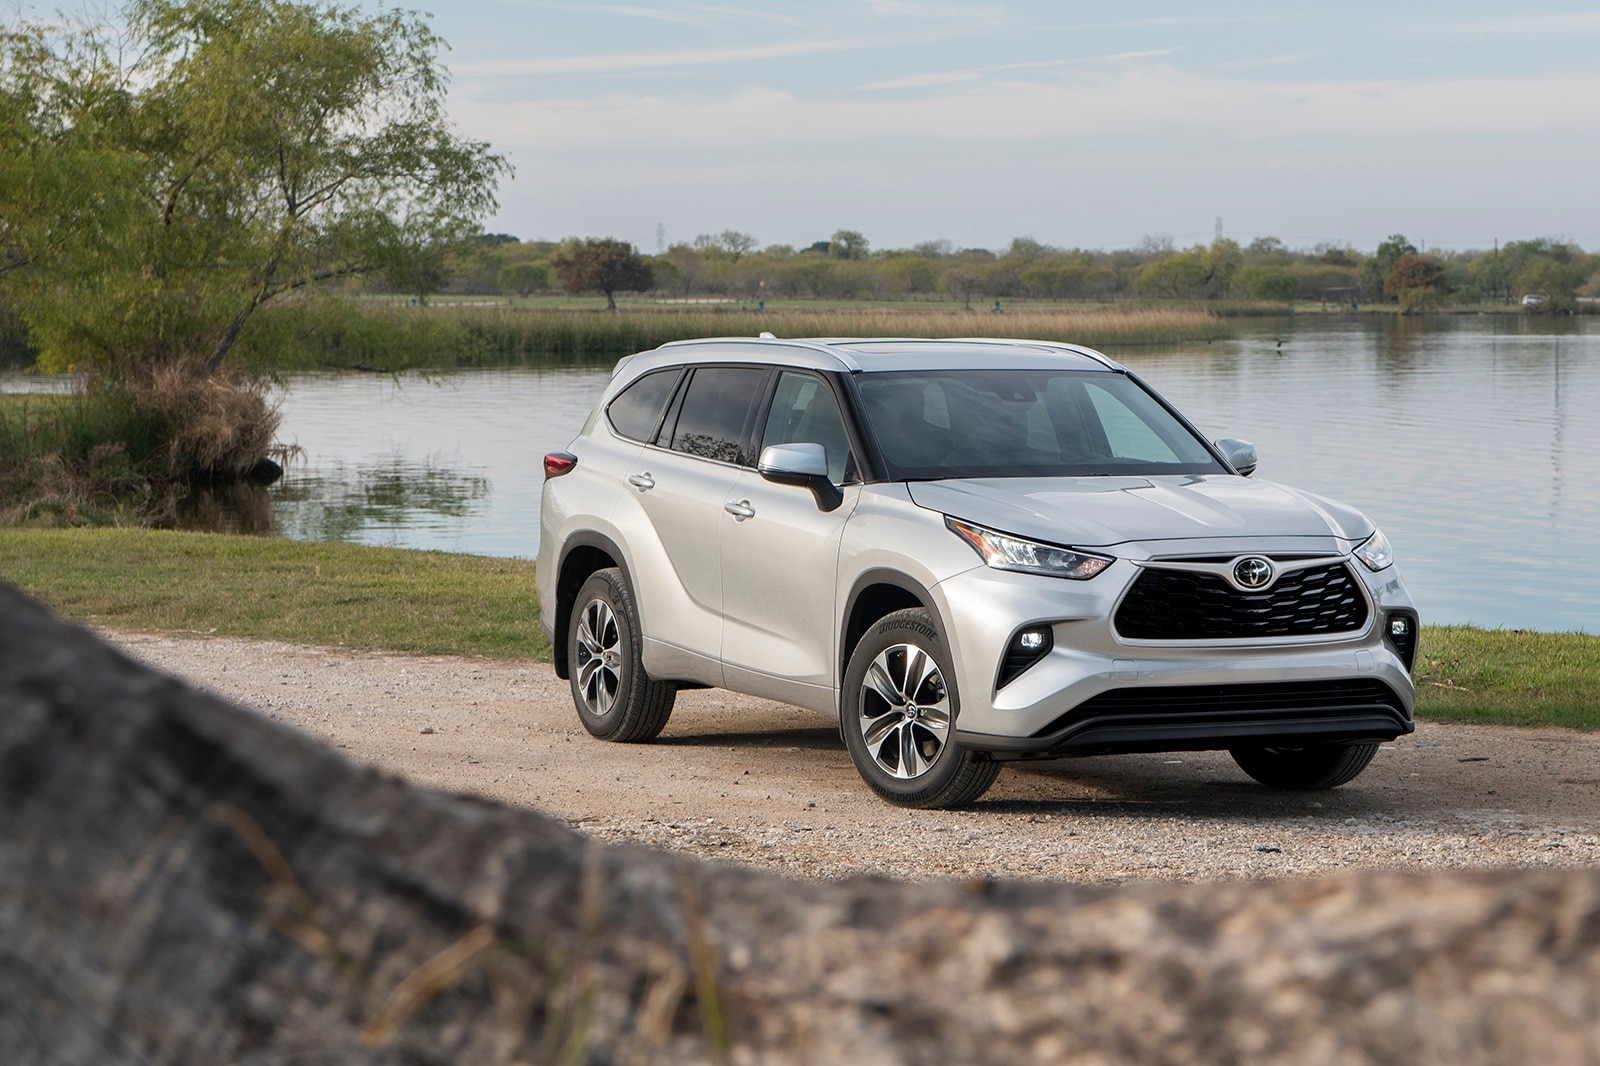 2022 Toyota Highlander: The One We Recommend